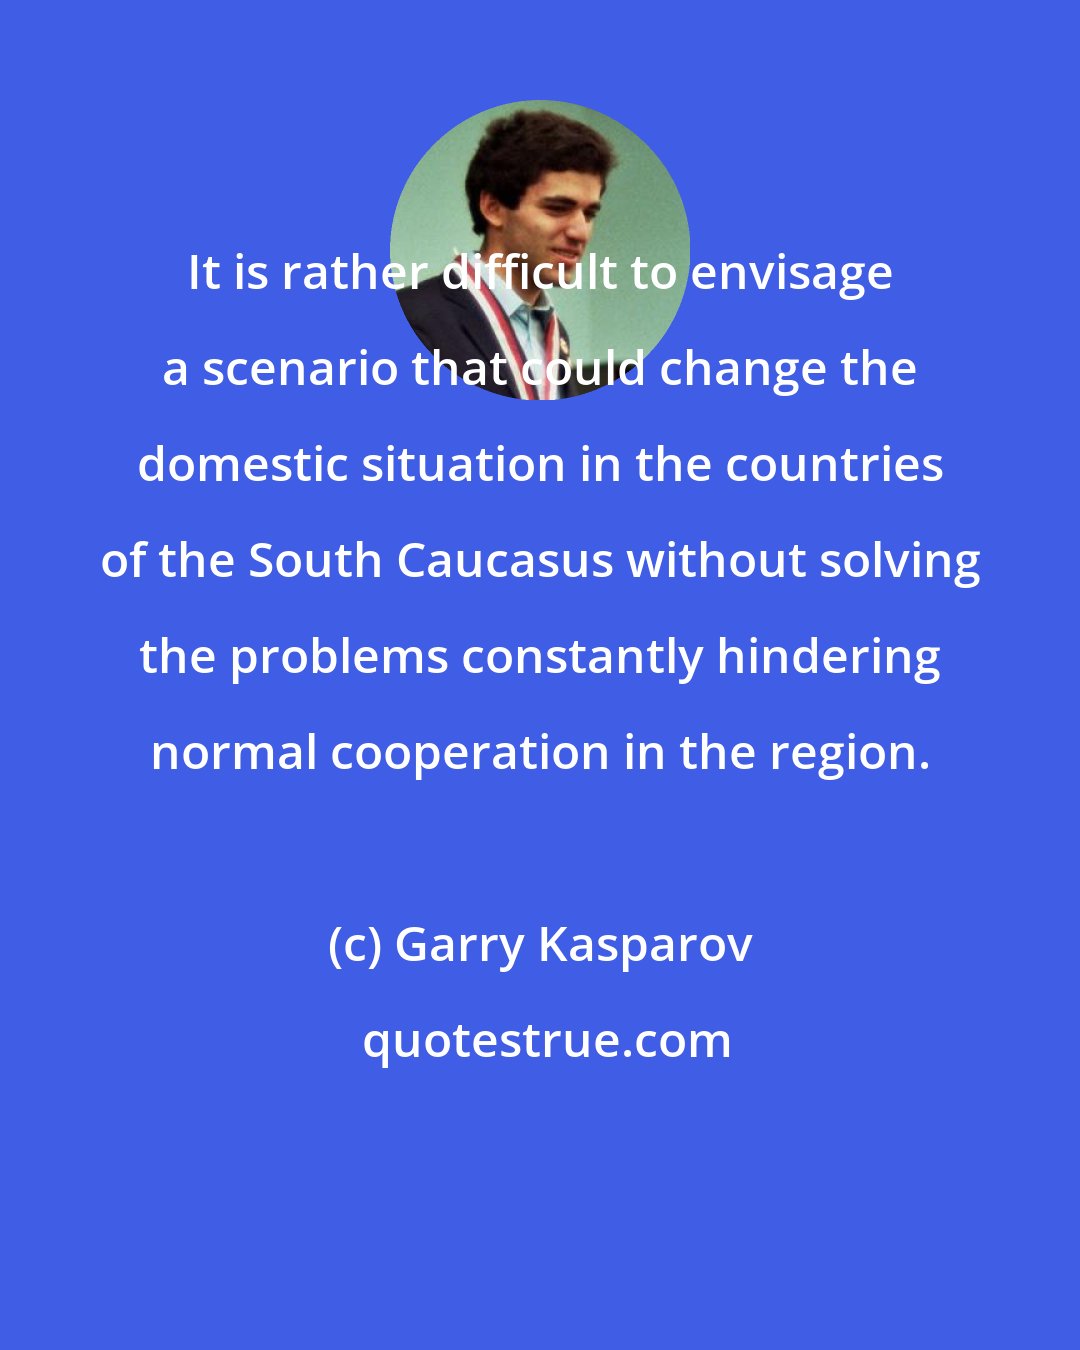 Garry Kasparov: It is rather difficult to envisage a scenario that could change the domestic situation in the countries of the South Caucasus without solving the problems constantly hindering normal cooperation in the region.